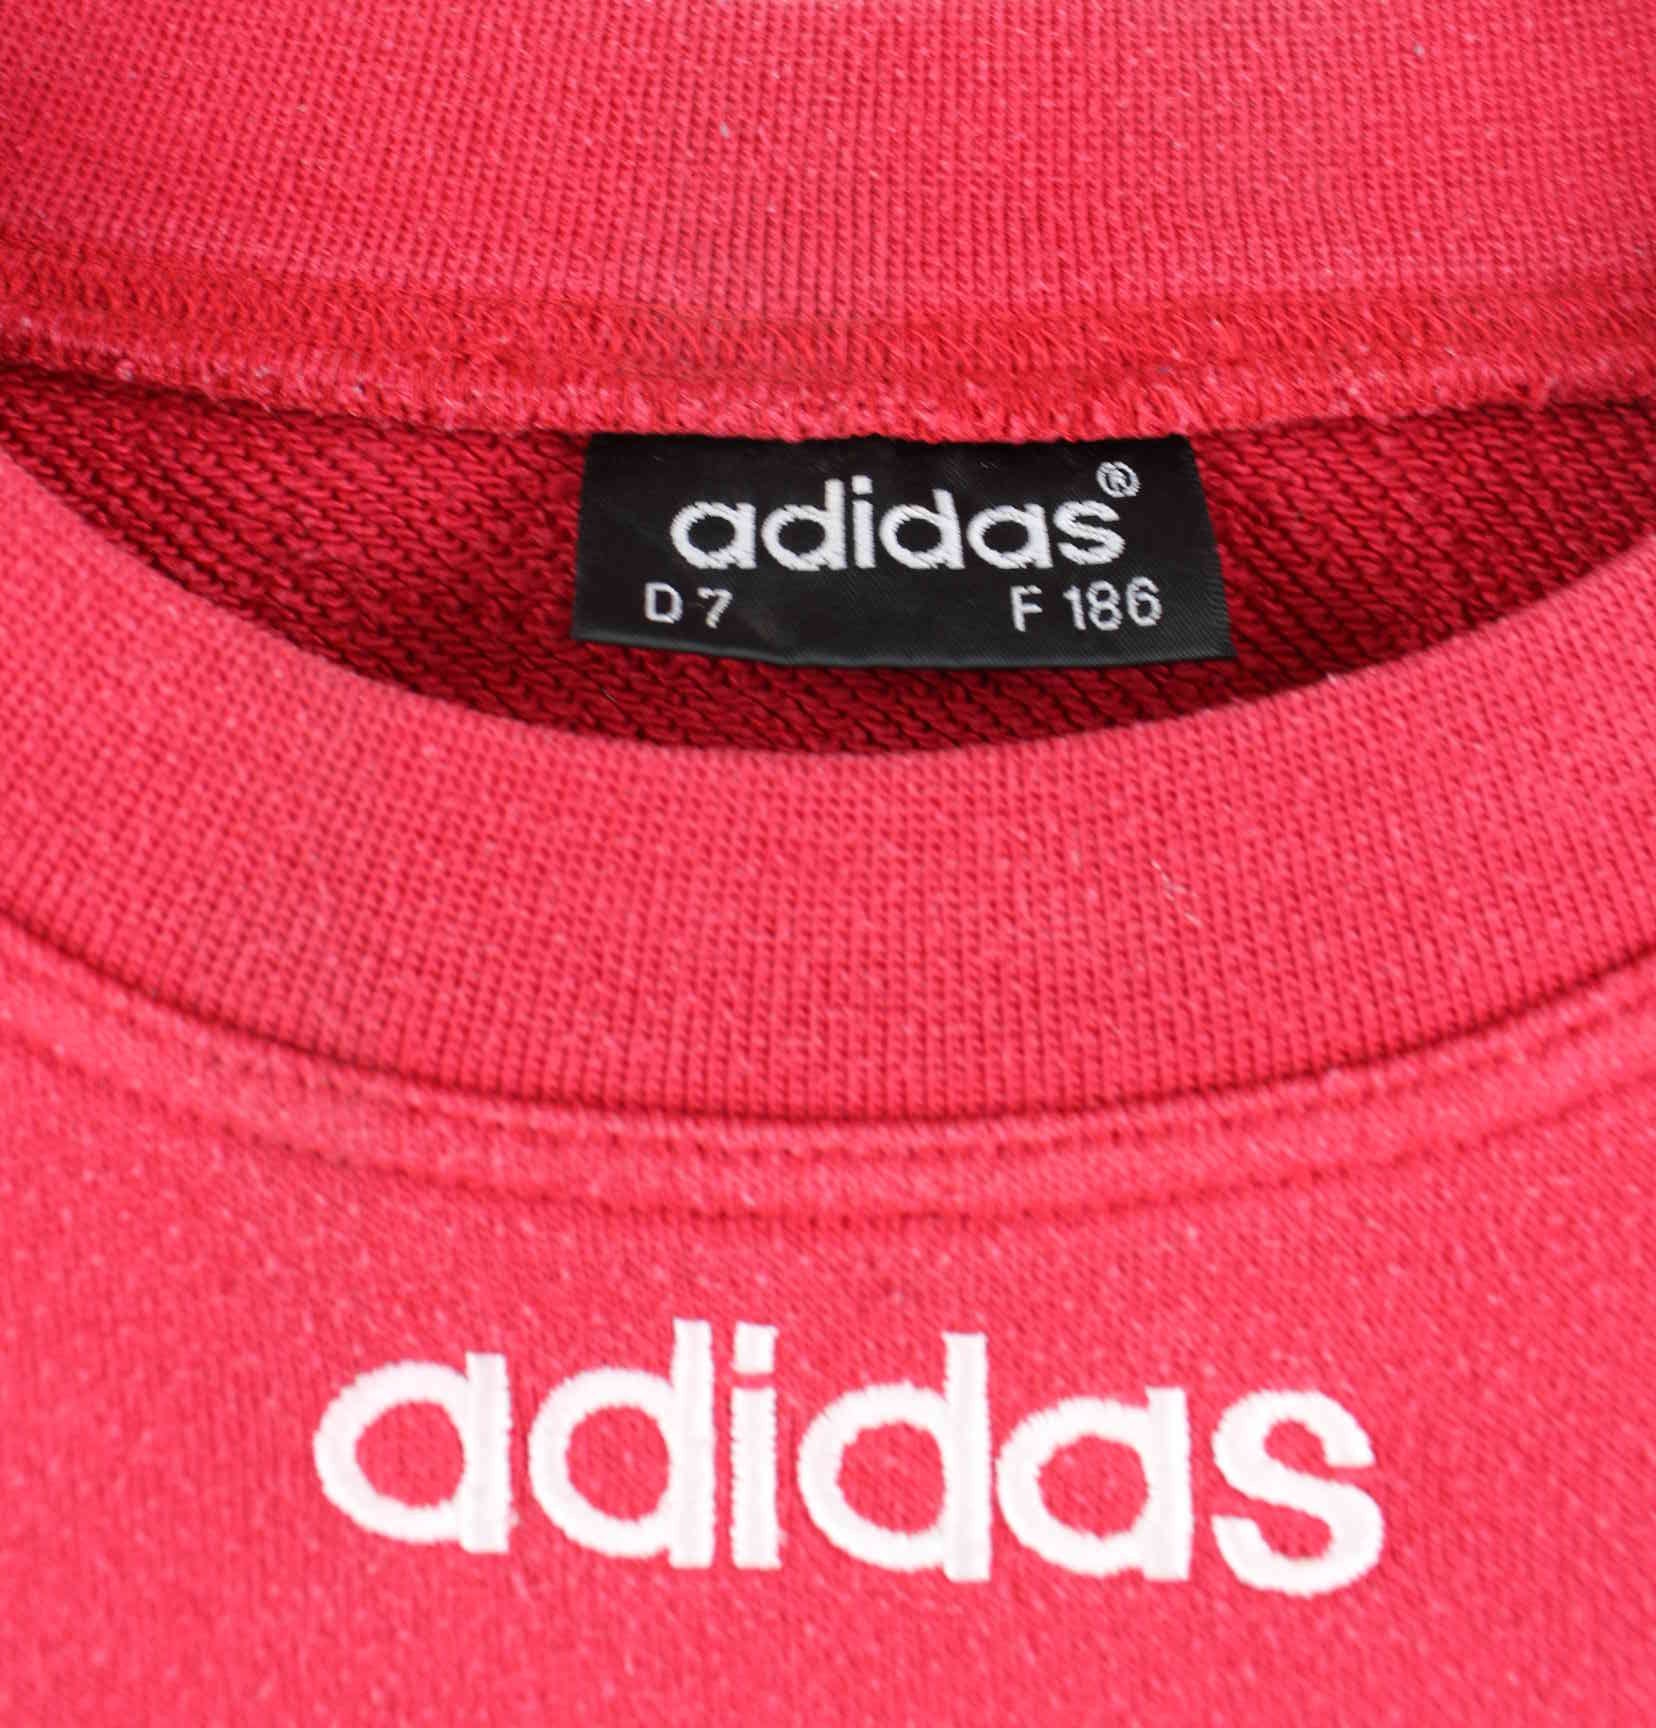 Adidas 90s Vintage 3-Stripes Embroidered Sweater Rot XL (detail image 2)